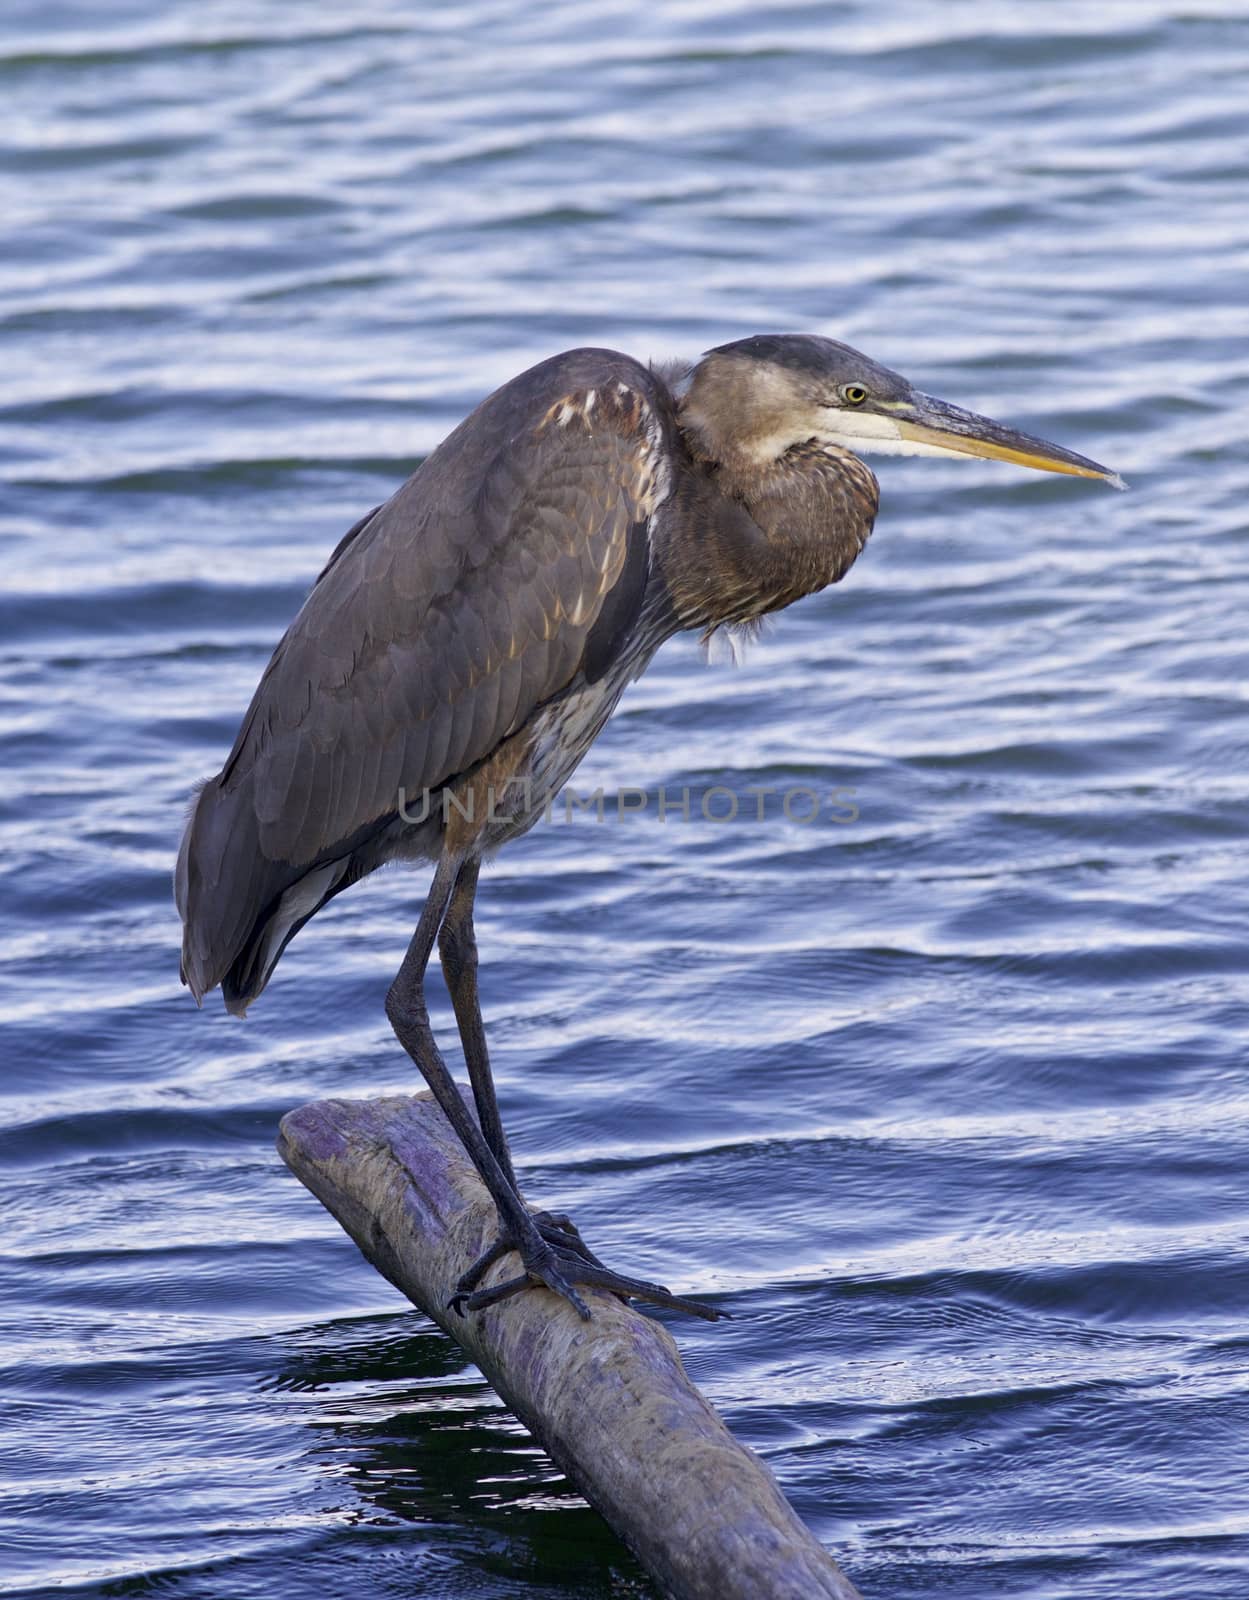 Beautiful image with a great blue heron on a log in the lake